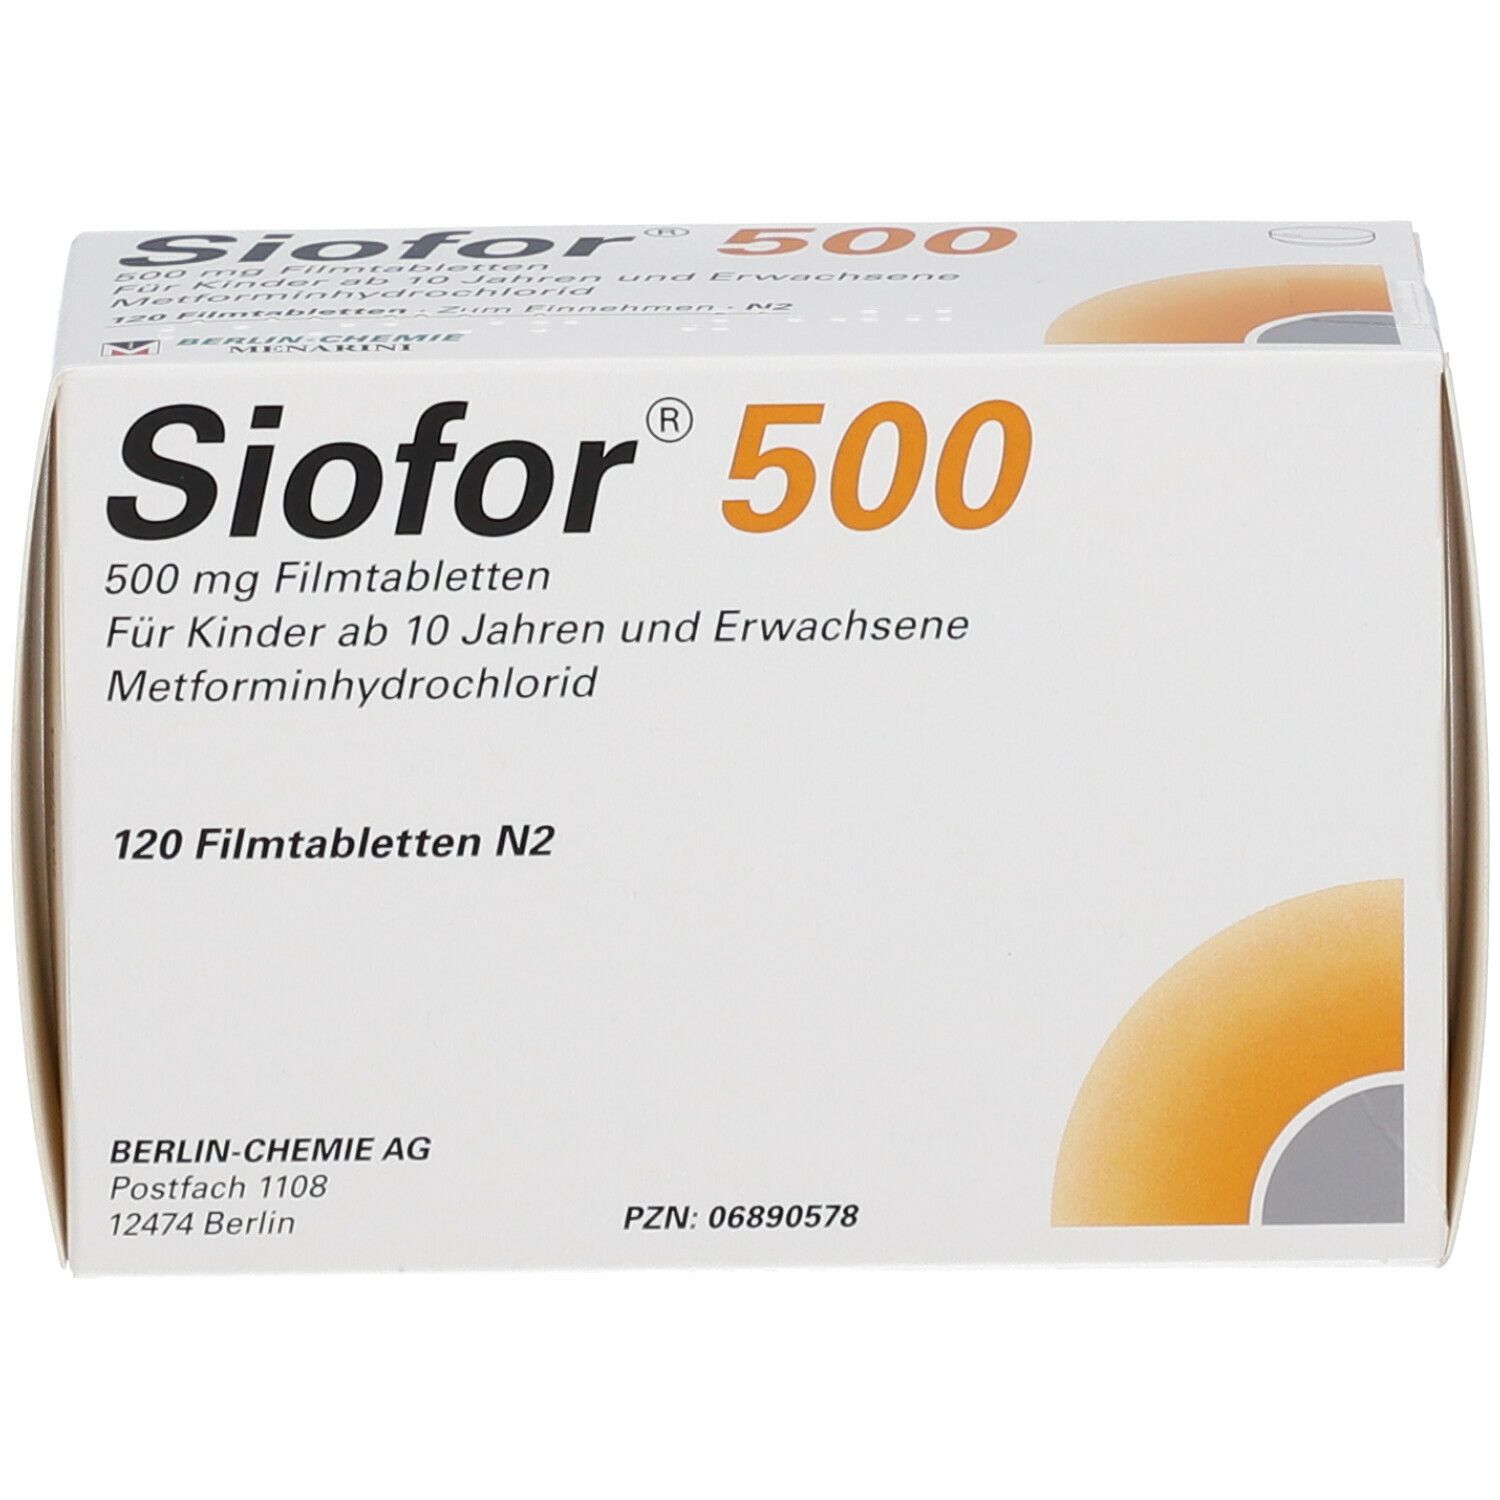 Siofor® 500